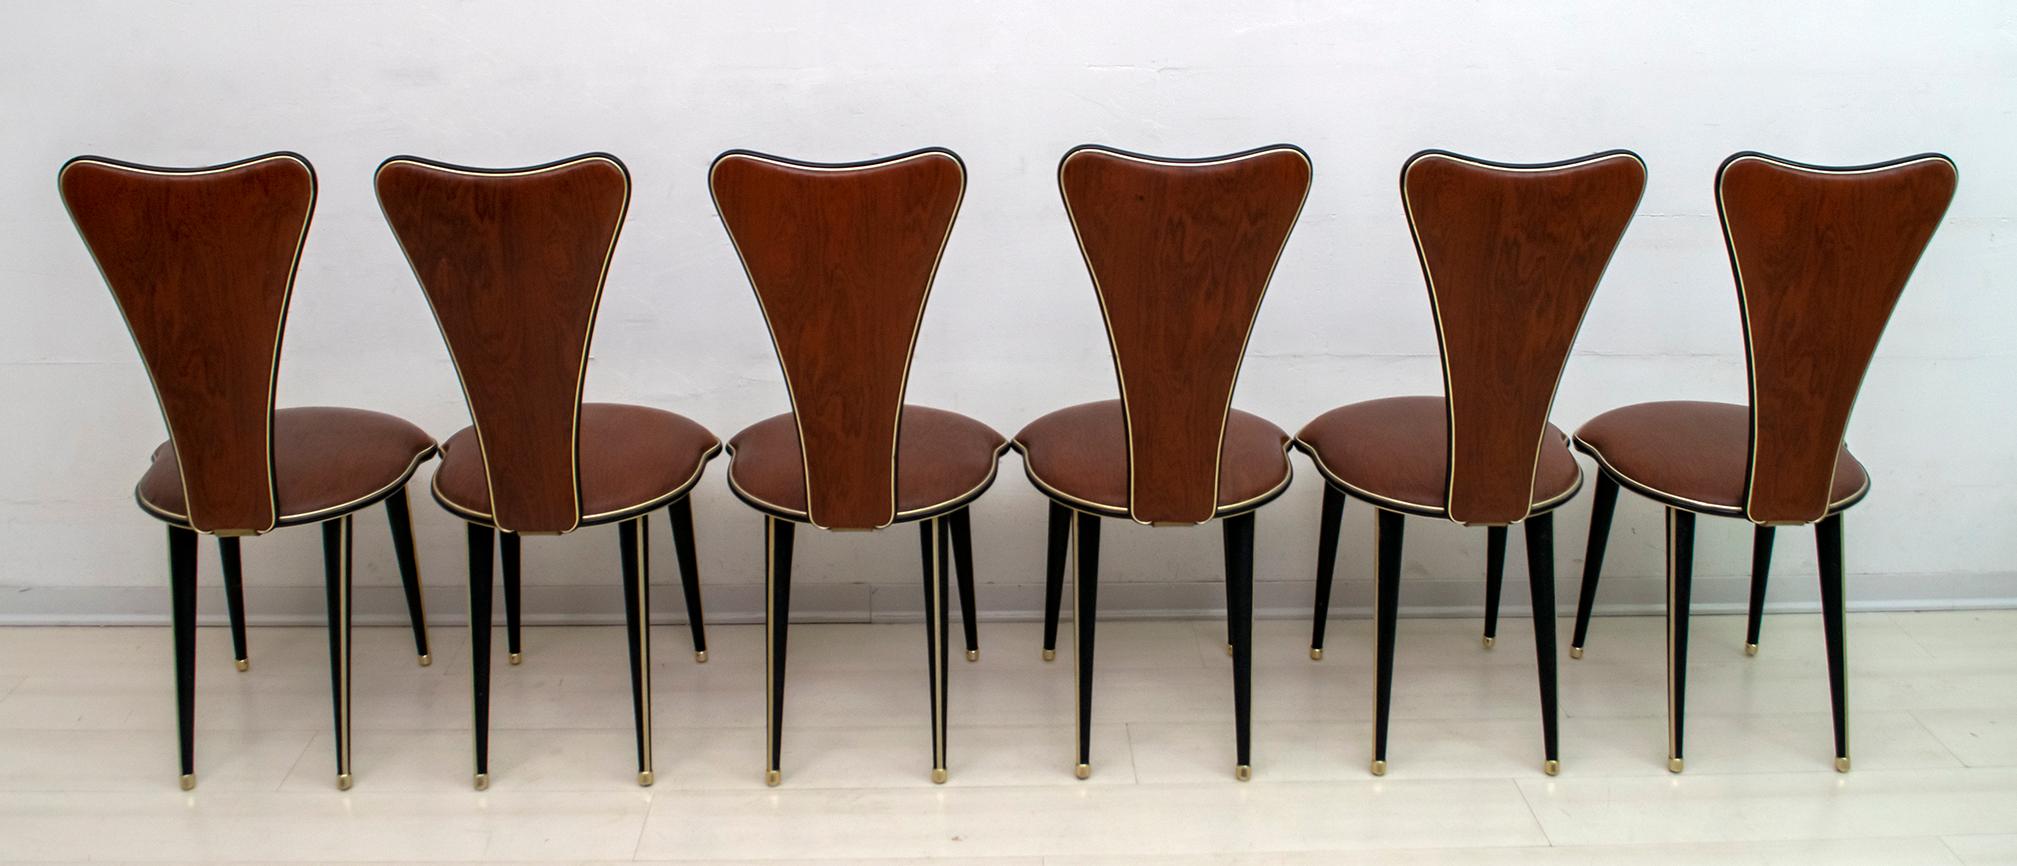 Umberto Mascagni for Harrods London Midcentury Modern Italian Dining Chairs, 50s In Good Condition In Puglia, Puglia